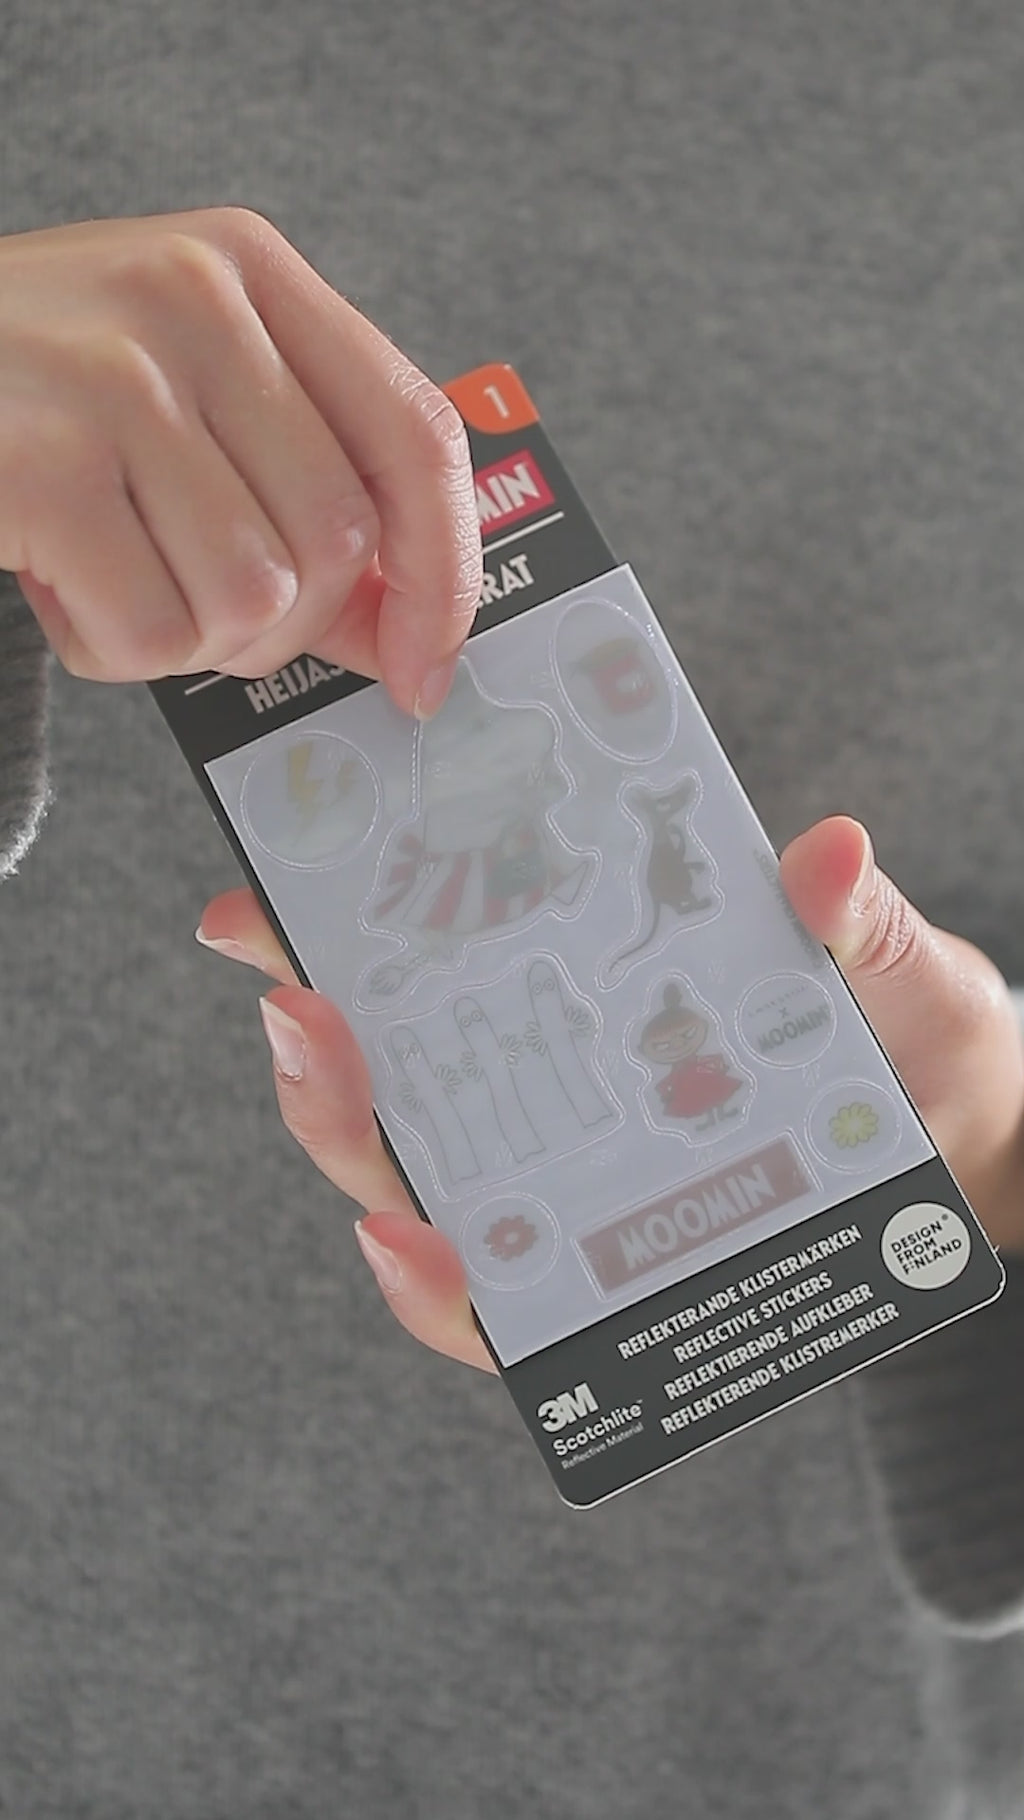 Video of reflective Moomin stickers